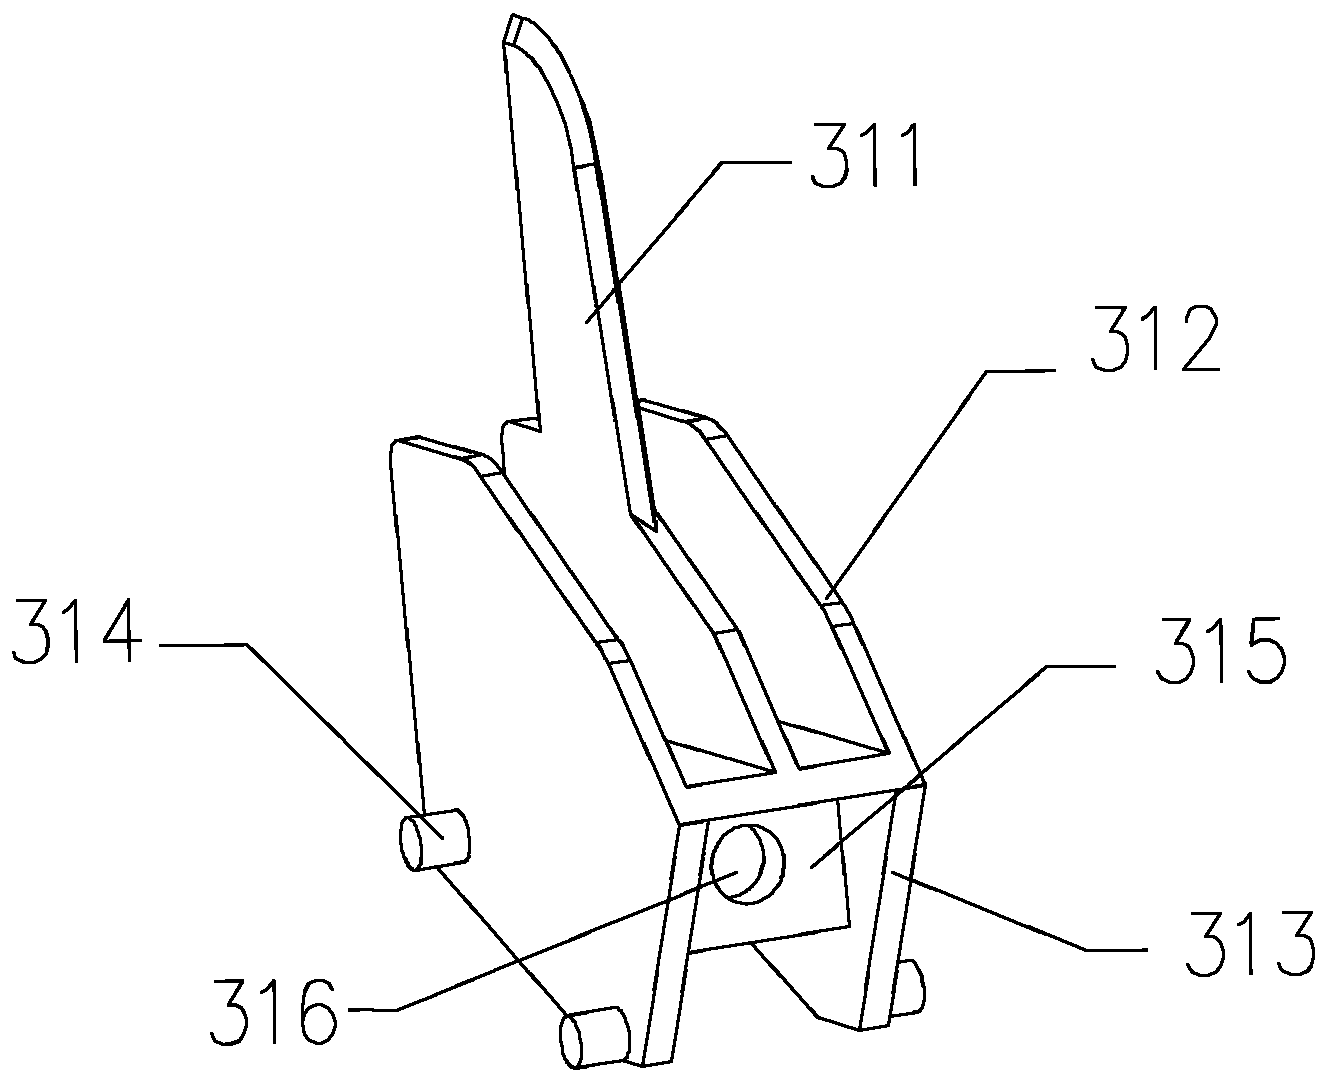 Stitching instrument with cutter and cutter component of stitching instrument with cutter